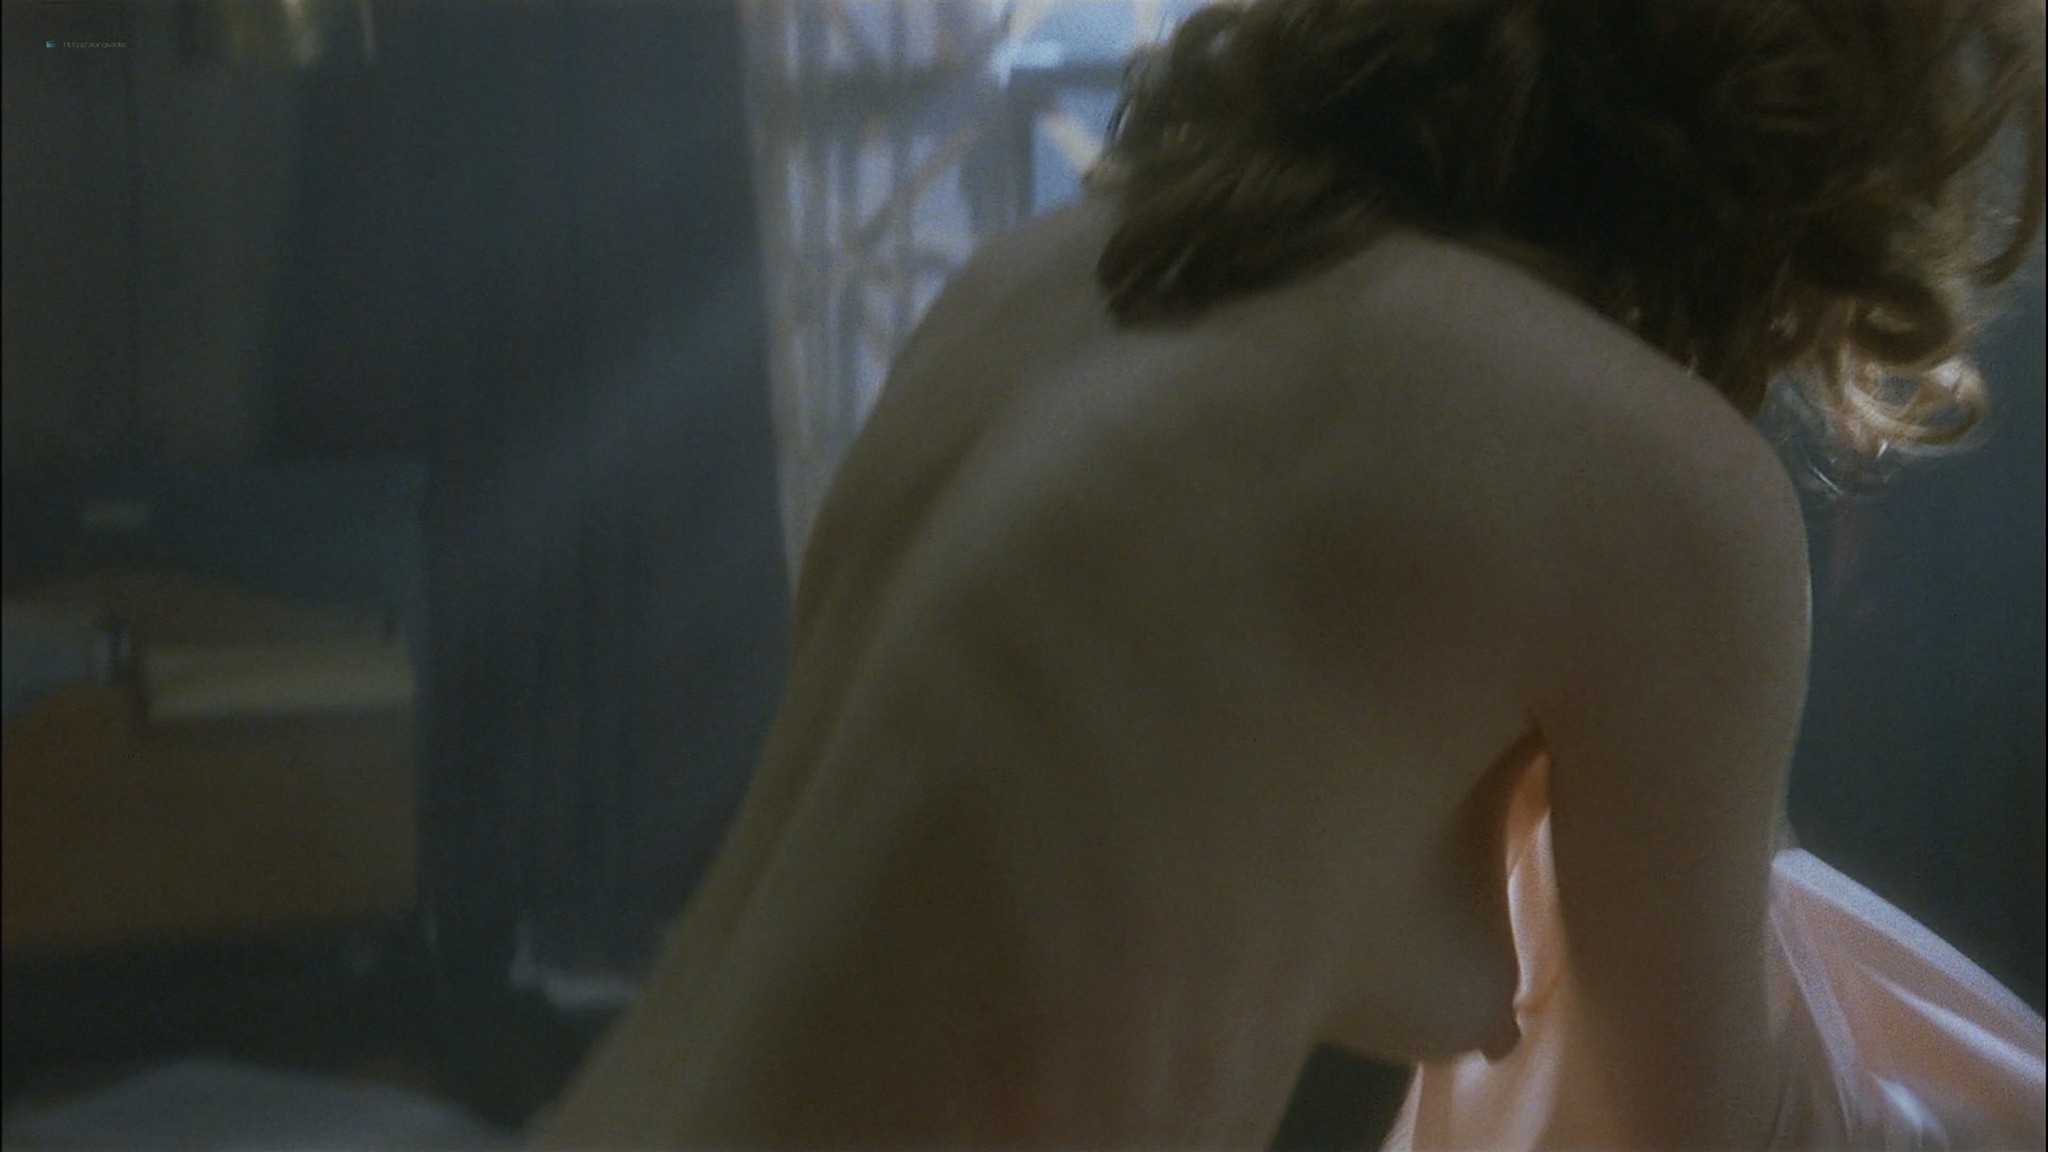 https://www.zorg.video/wp-content/uploads/2017/06/Julianne-Moore-nude-topless-and-sex-The-End-of-the-Affair-1999-HD-1080p-WEB-011.jpg